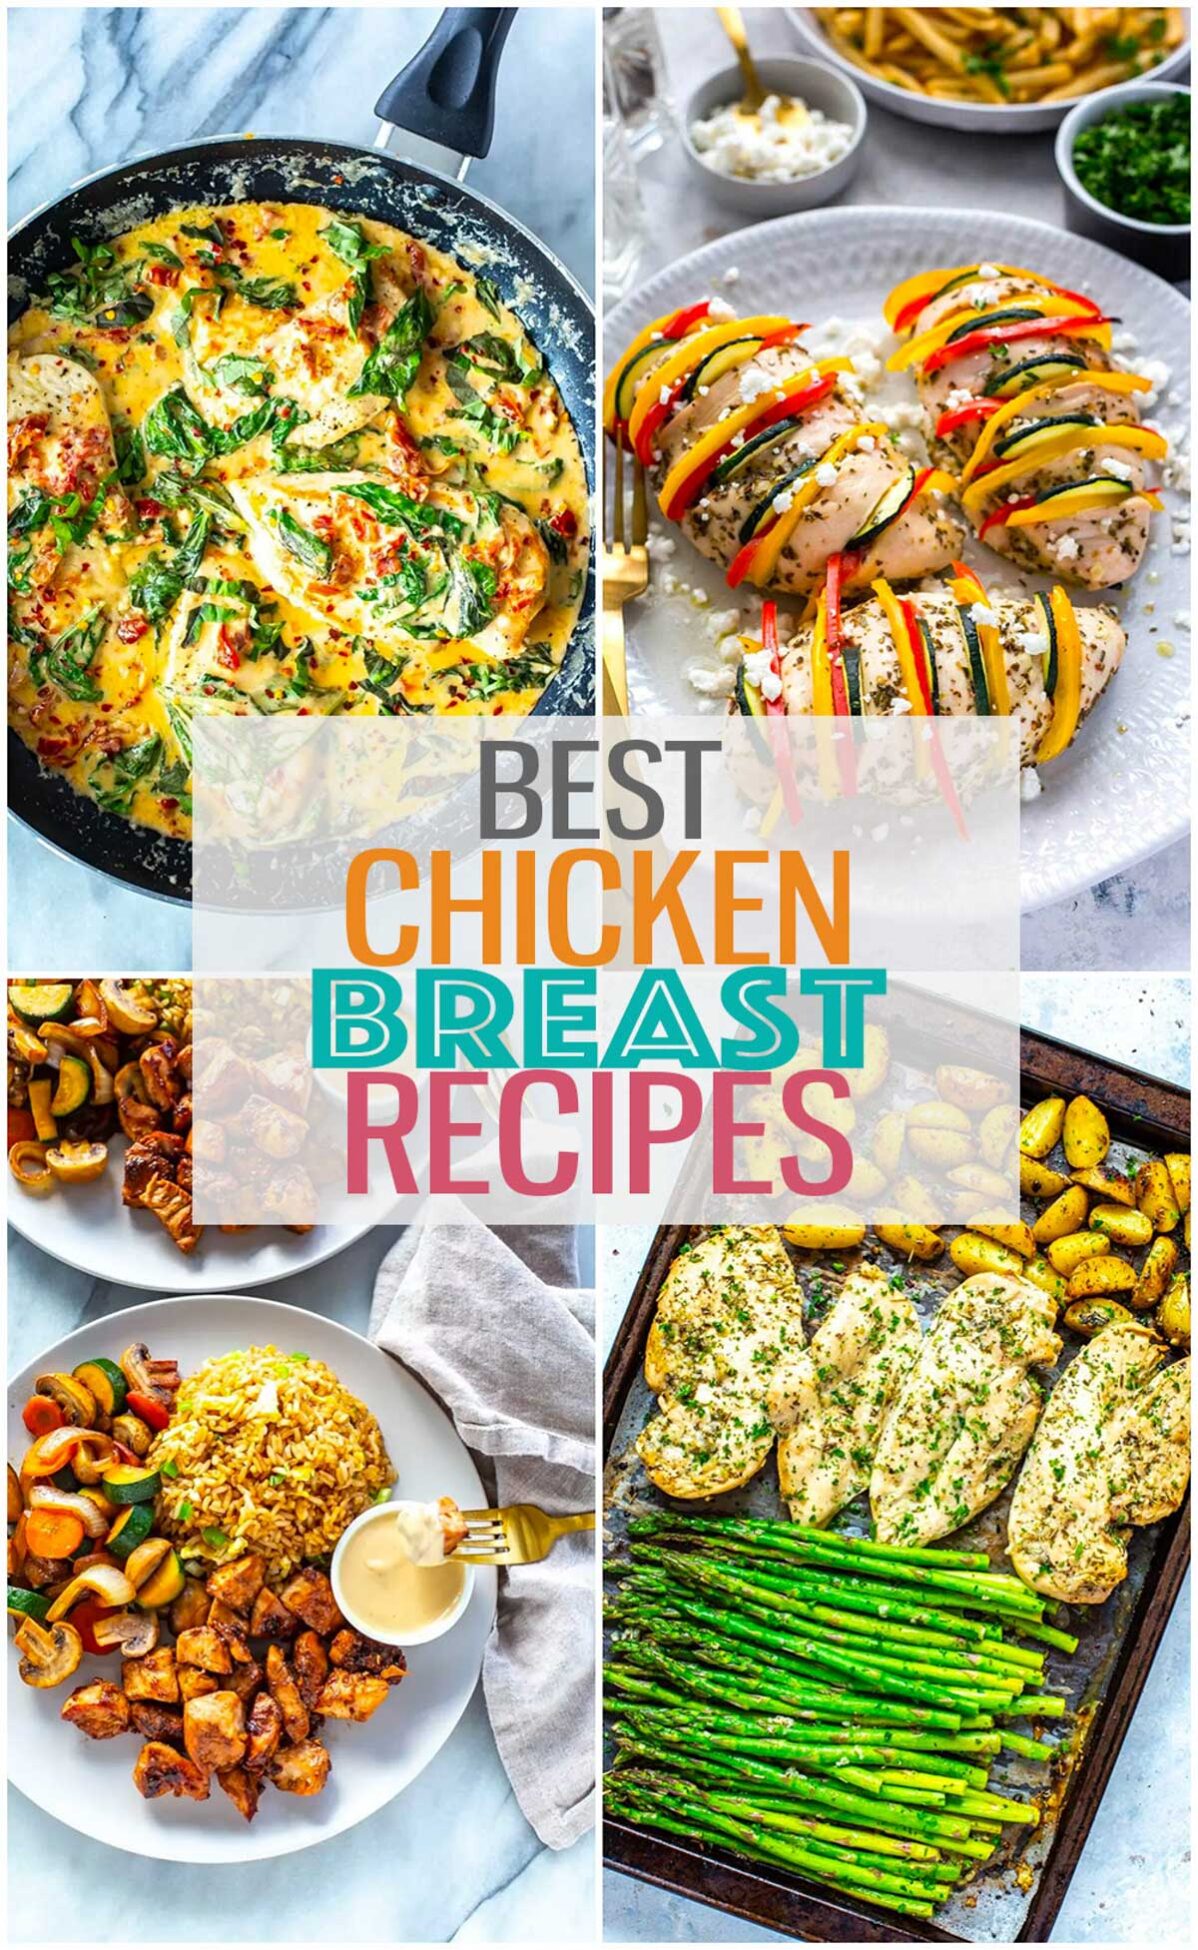 A collage featuring four different chicken breast recipes with the text "Best Chicken Breast Recipes" layered over top.